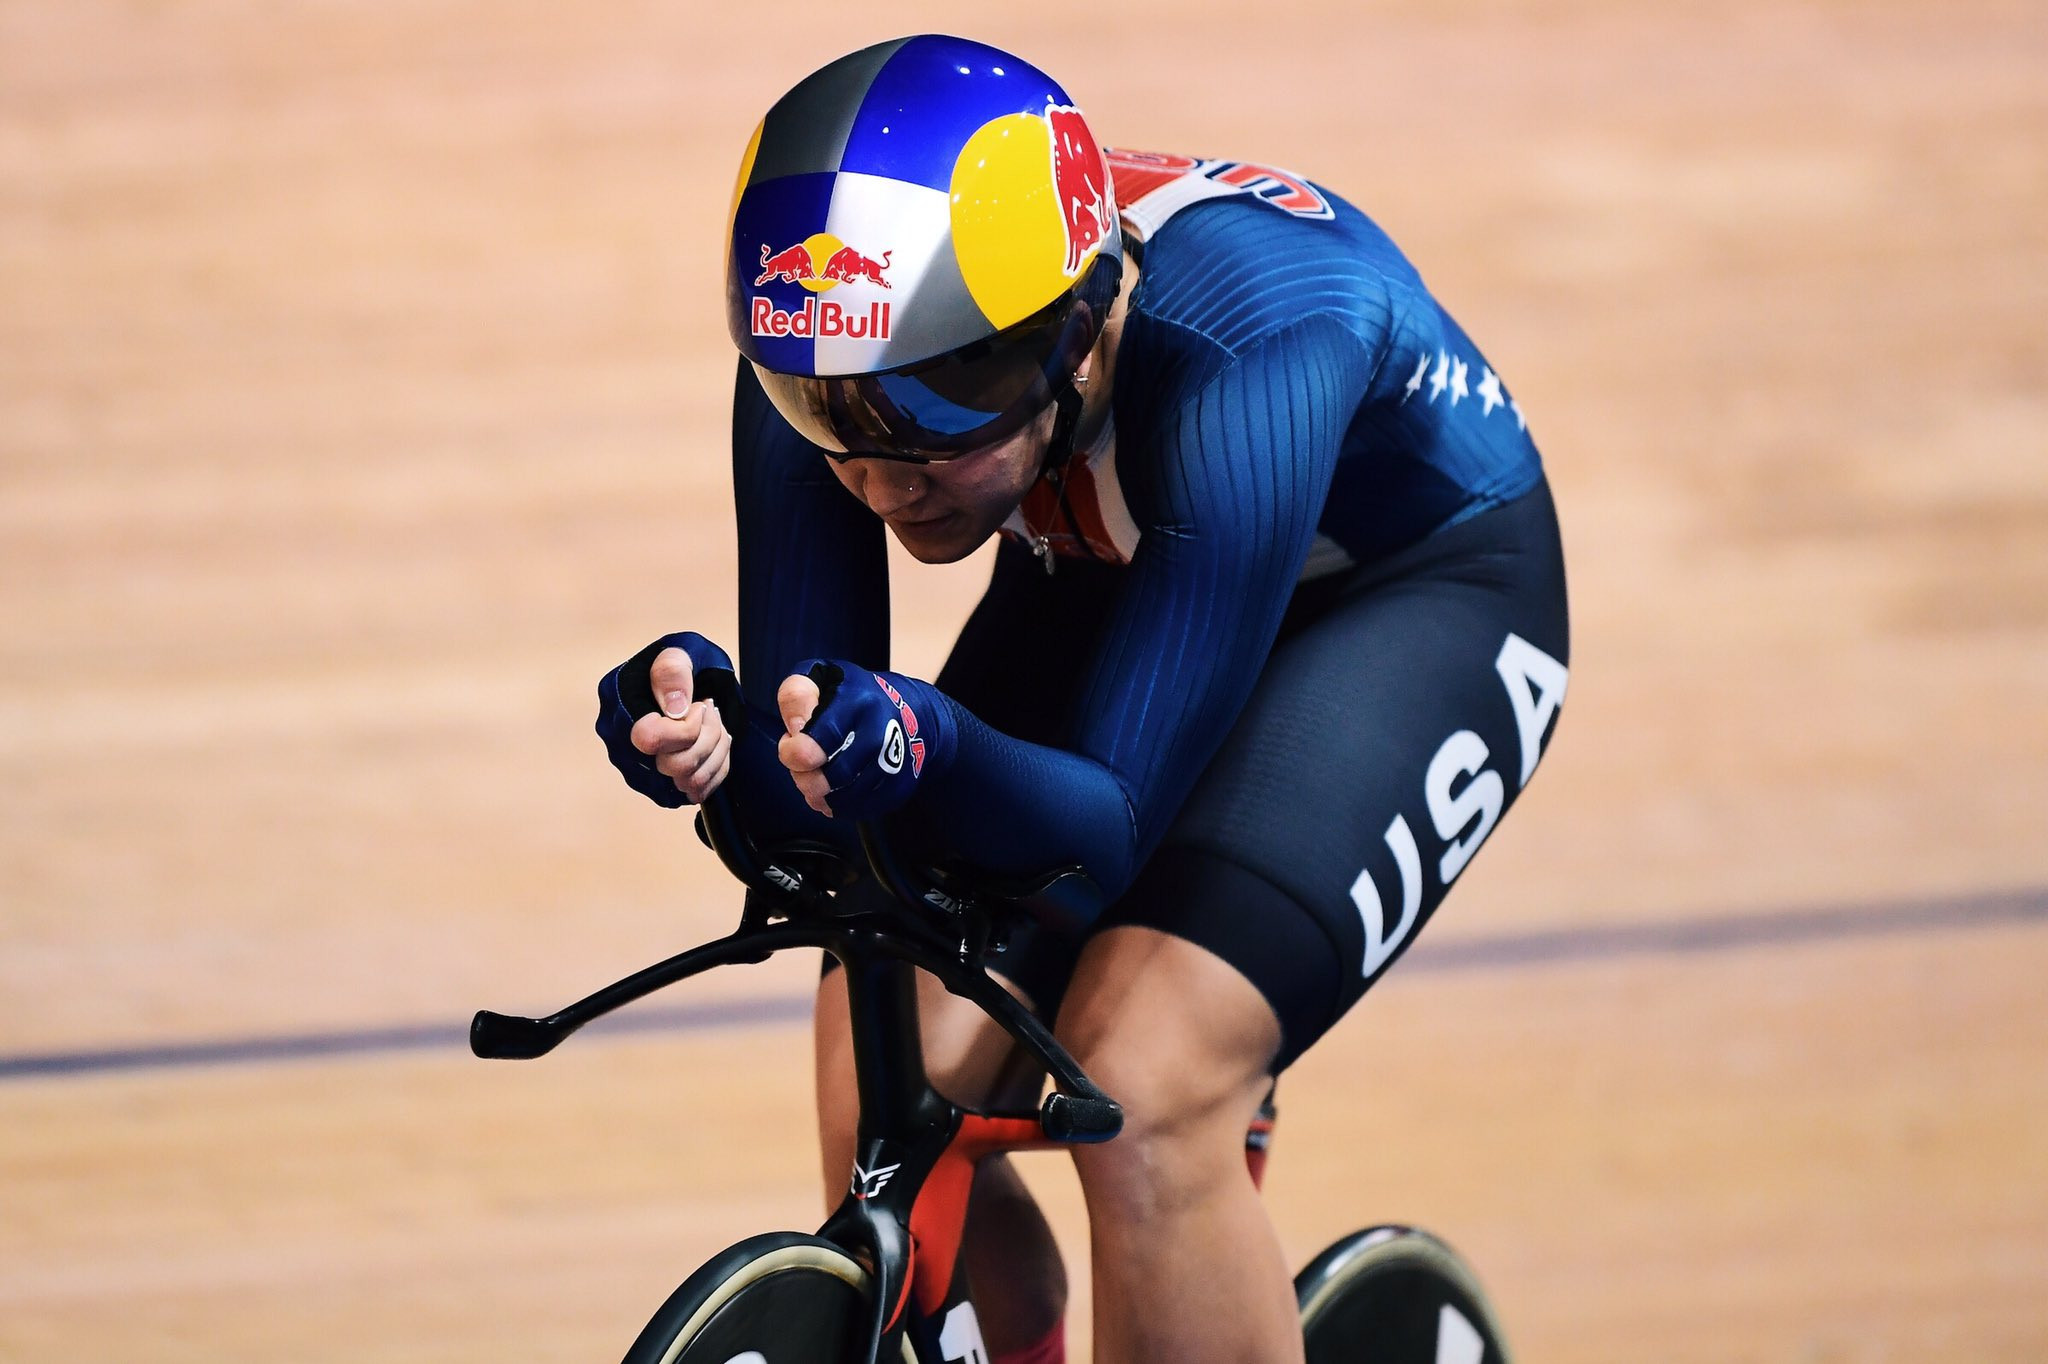 track cycling pursuit